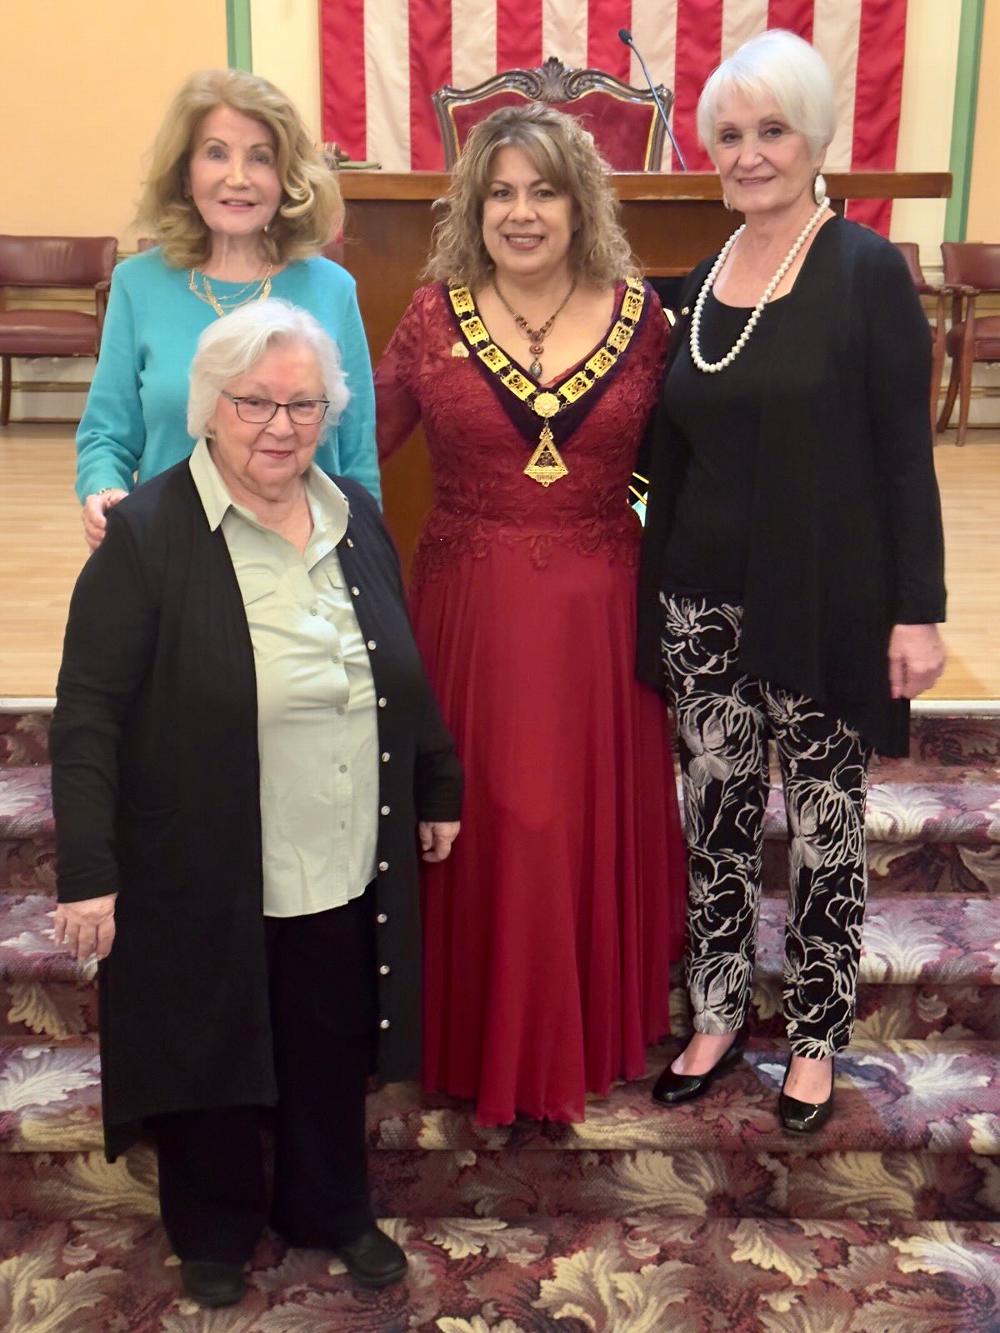 March 2023 Initiates - Maria Perez, ER Laura Fiallos, Barbara Jacoby and Diane Askew